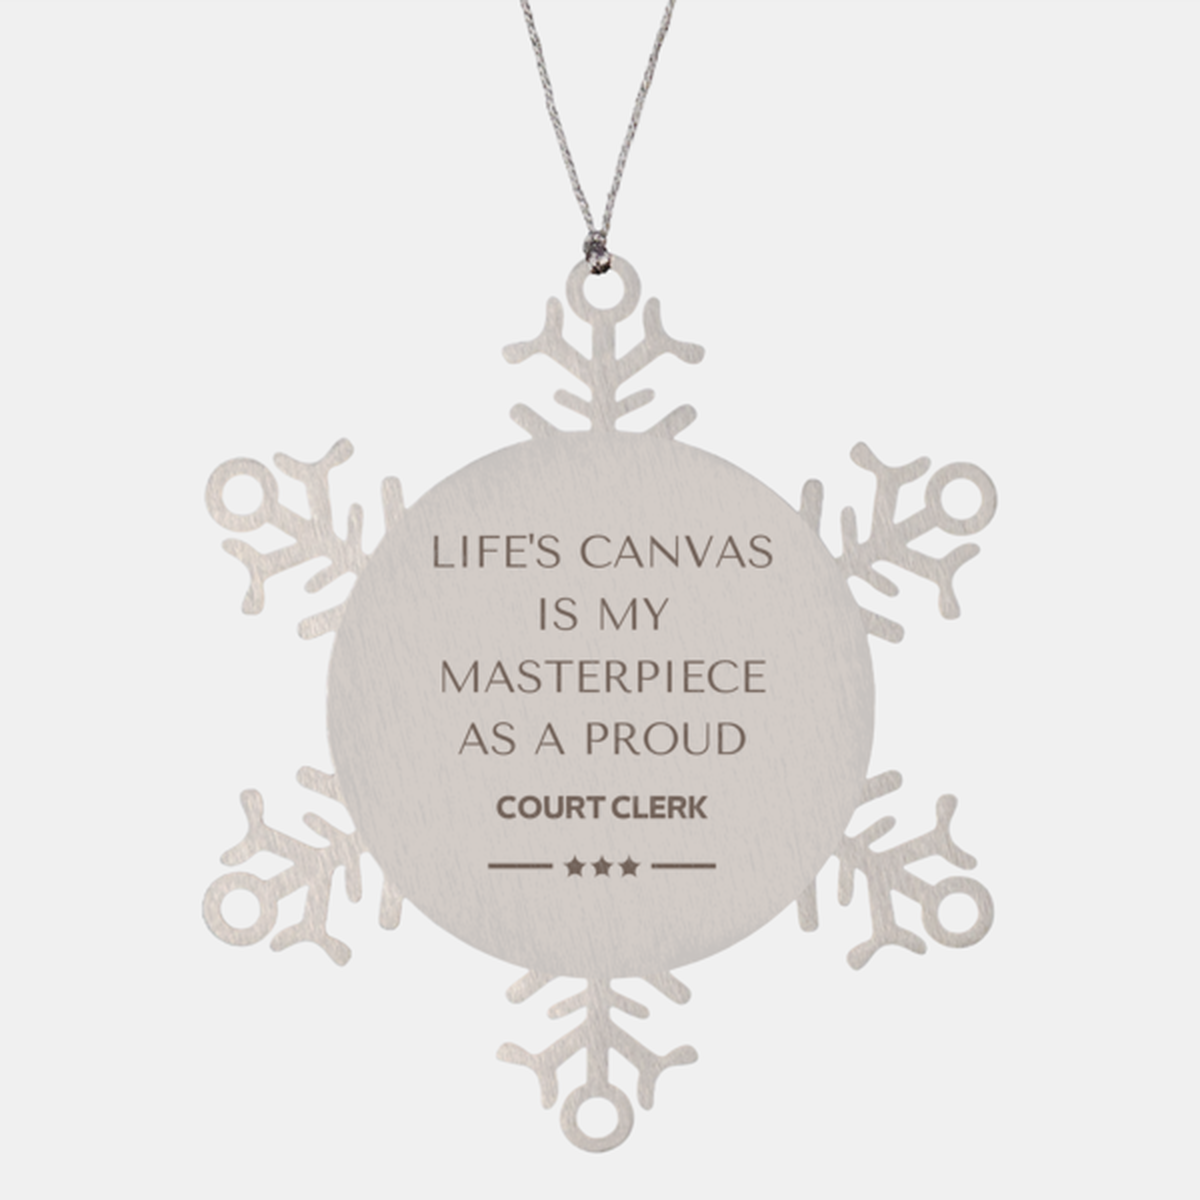 Proud Court Clerk Gifts, Life's canvas is my masterpiece, Epic Birthday Christmas Unique Snowflake Ornament For Court Clerk, Coworkers, Men, Women, Friends